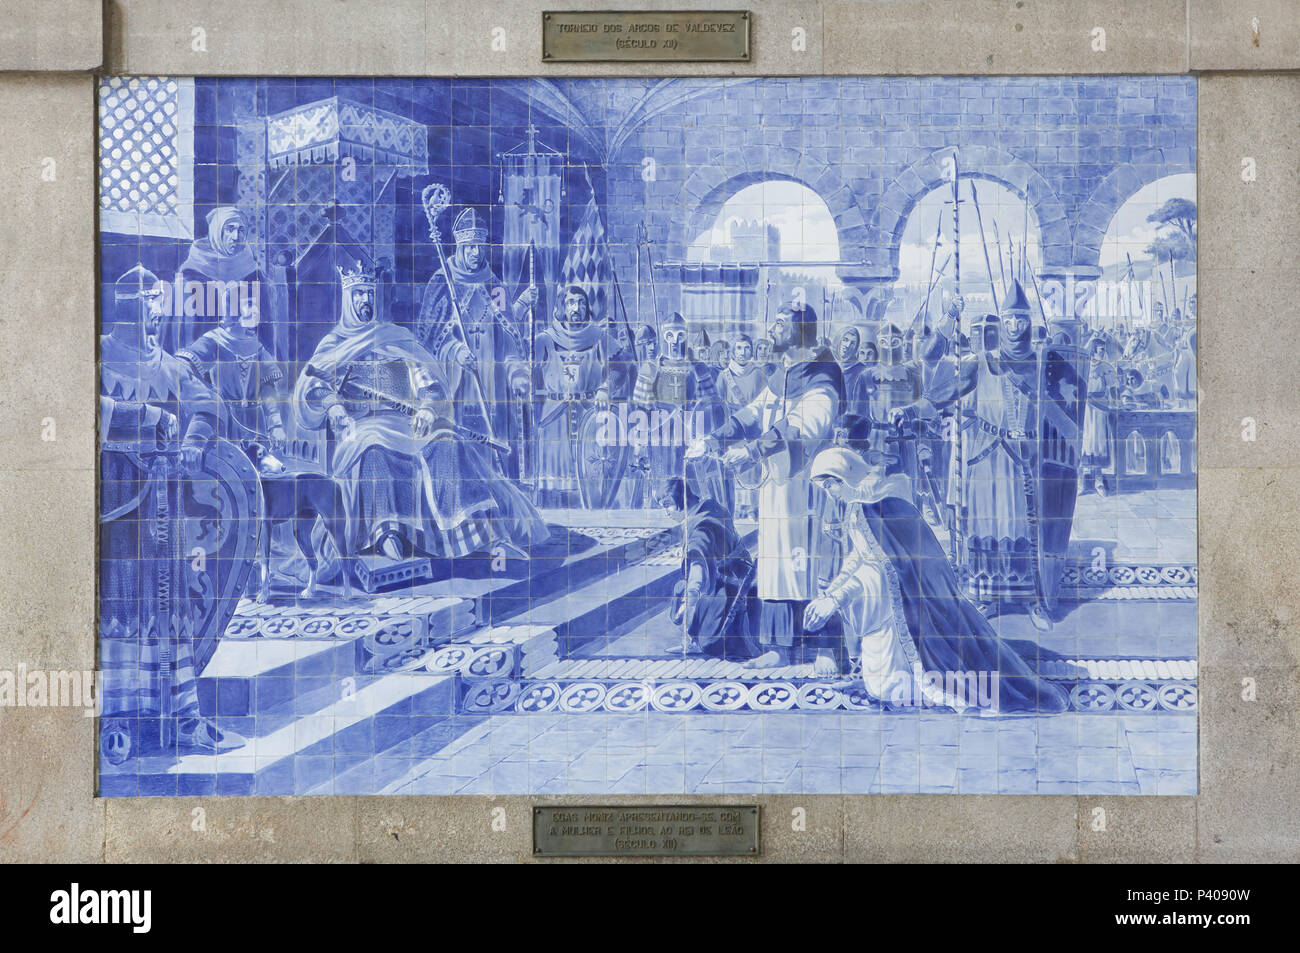 Knight Egas Moniz presenting himself to Emperor Alfonso VII in Toledo offering his life, his wife and his sons during the siege of the Castle of Guimarães in 1127. Azulejo panel painted by Portuguese painter Jorge Colaço in 1905-1916 in the São Bento railway station (Estação Ferroviária de São Bento) in Porto, Portugal. Stock Photo